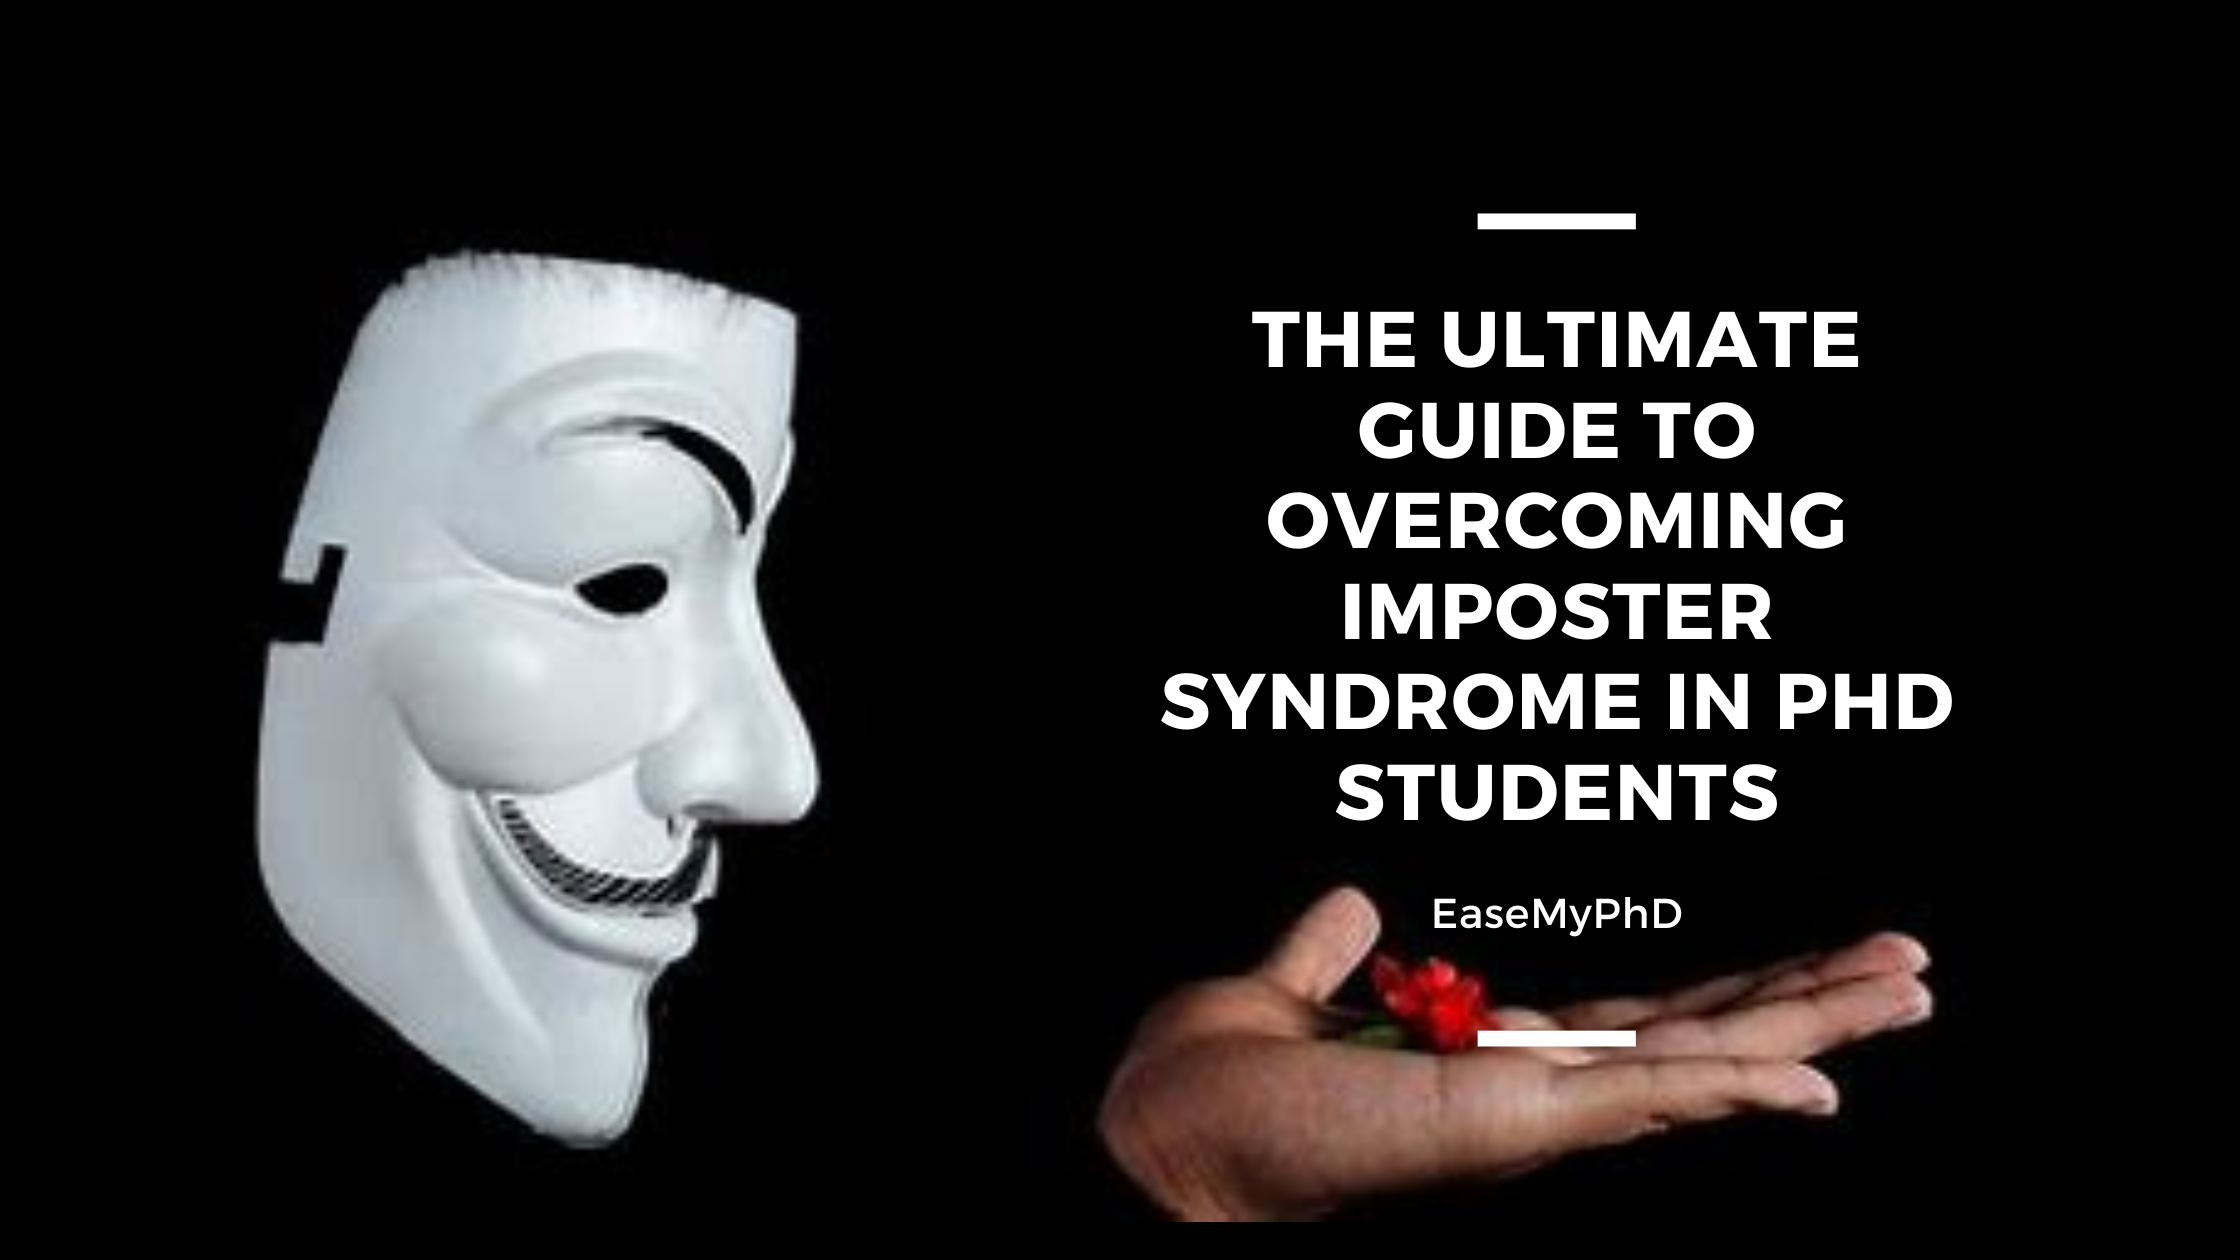 The Ultimate Guide to Overcoming Imposter Syndrome in PhD Students